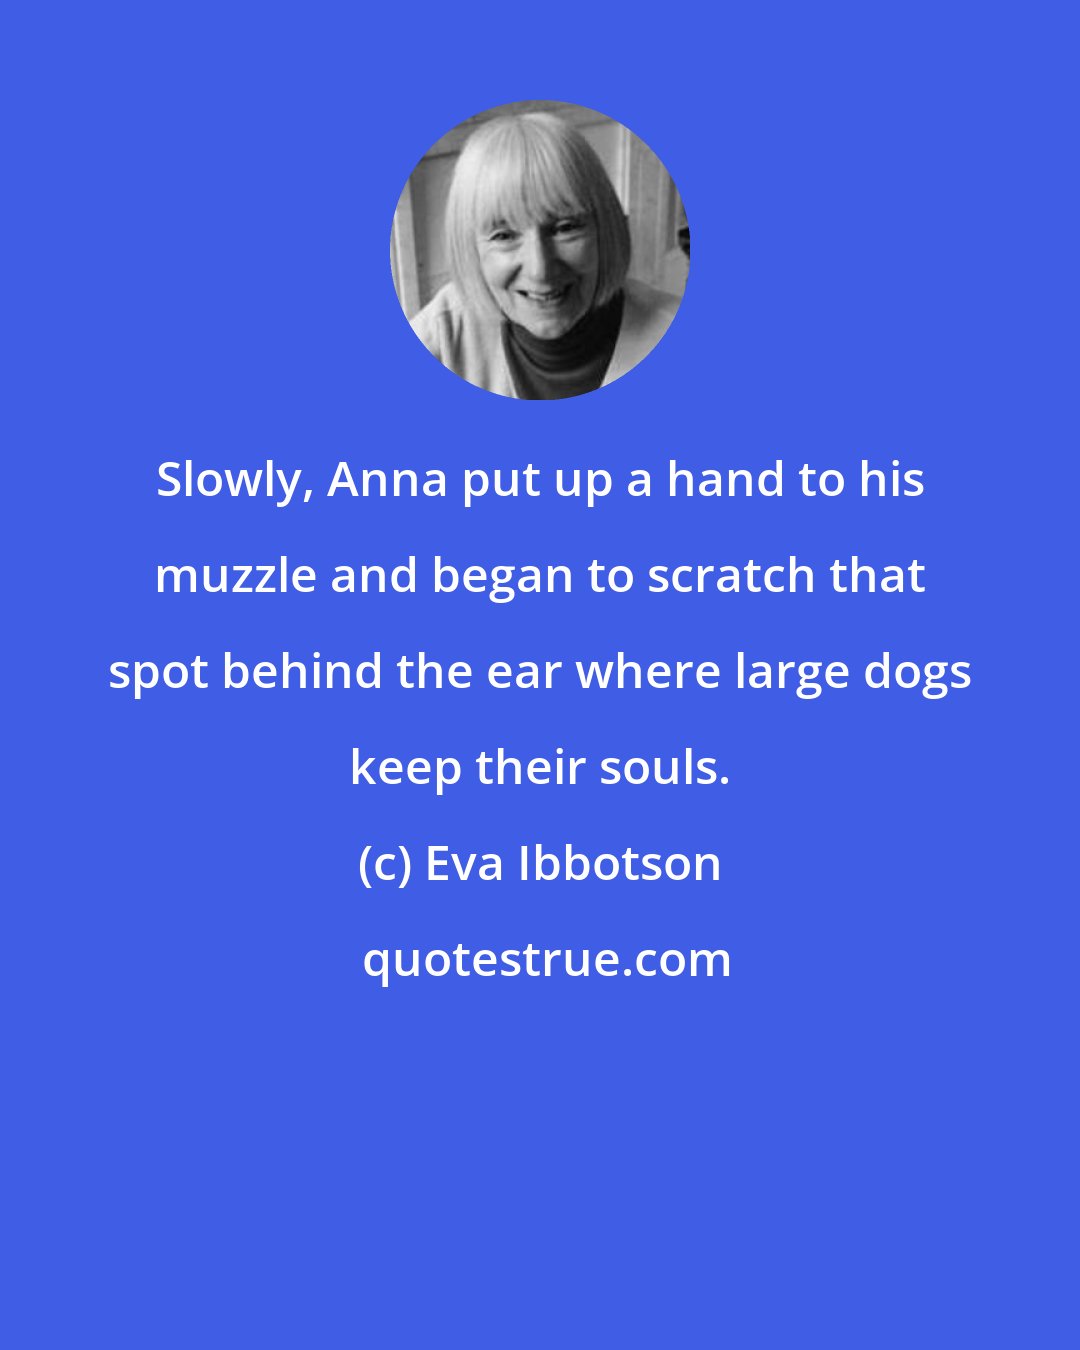 Eva Ibbotson: Slowly, Anna put up a hand to his muzzle and began to scratch that spot behind the ear where large dogs keep their souls.